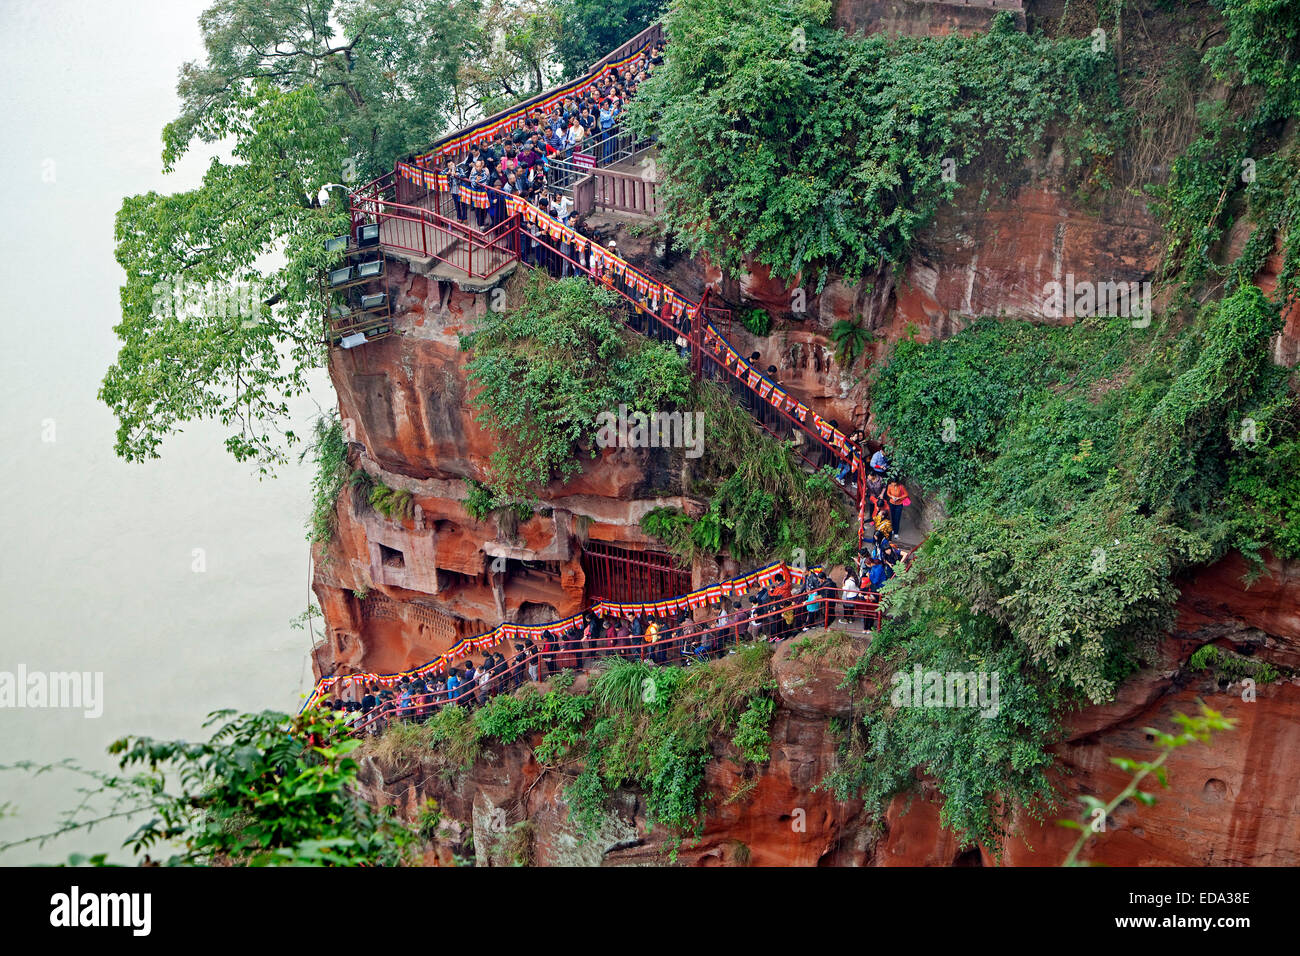 Queue of Chinese tourists walking down the stairs to see the Leshan Giant Buddha, stone-carved statue in Sichuan province, China Stock Photo